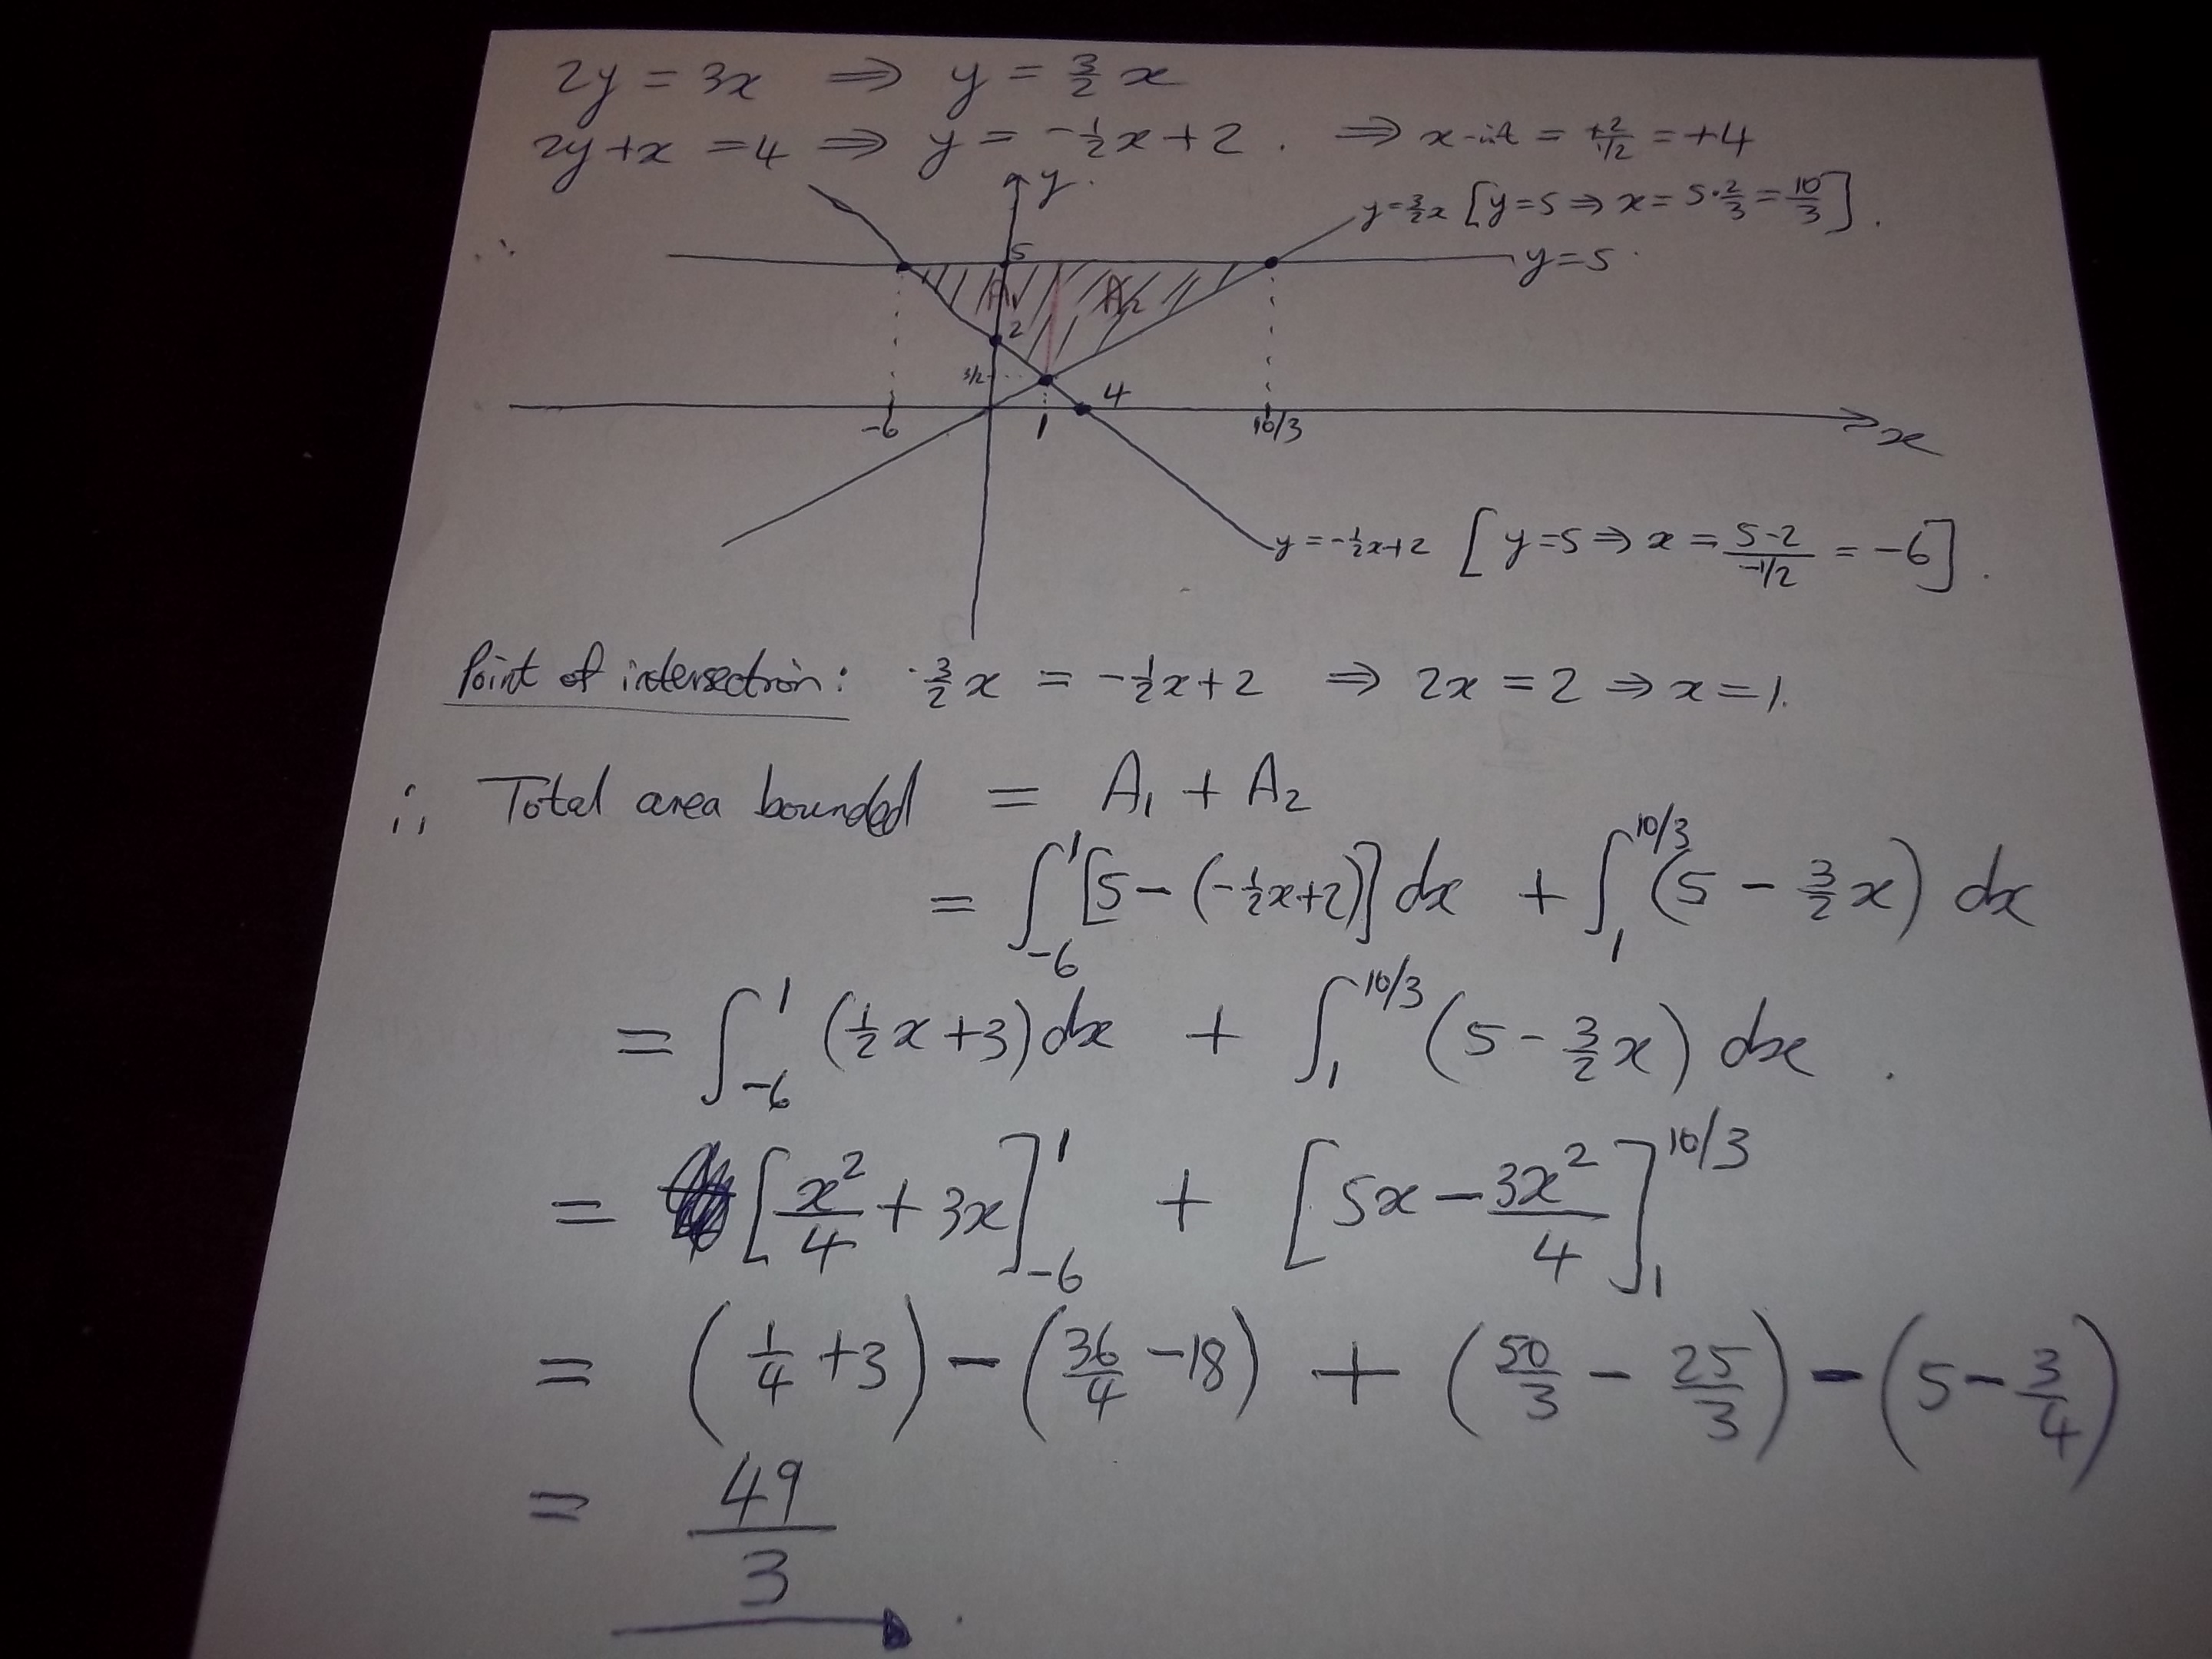 How Do You Sketch The Region Enclosed By The Given Curves And Decide Whether To Integrate With Respect To X Or Y Then Find The Area Of The Region Of 2y 3x